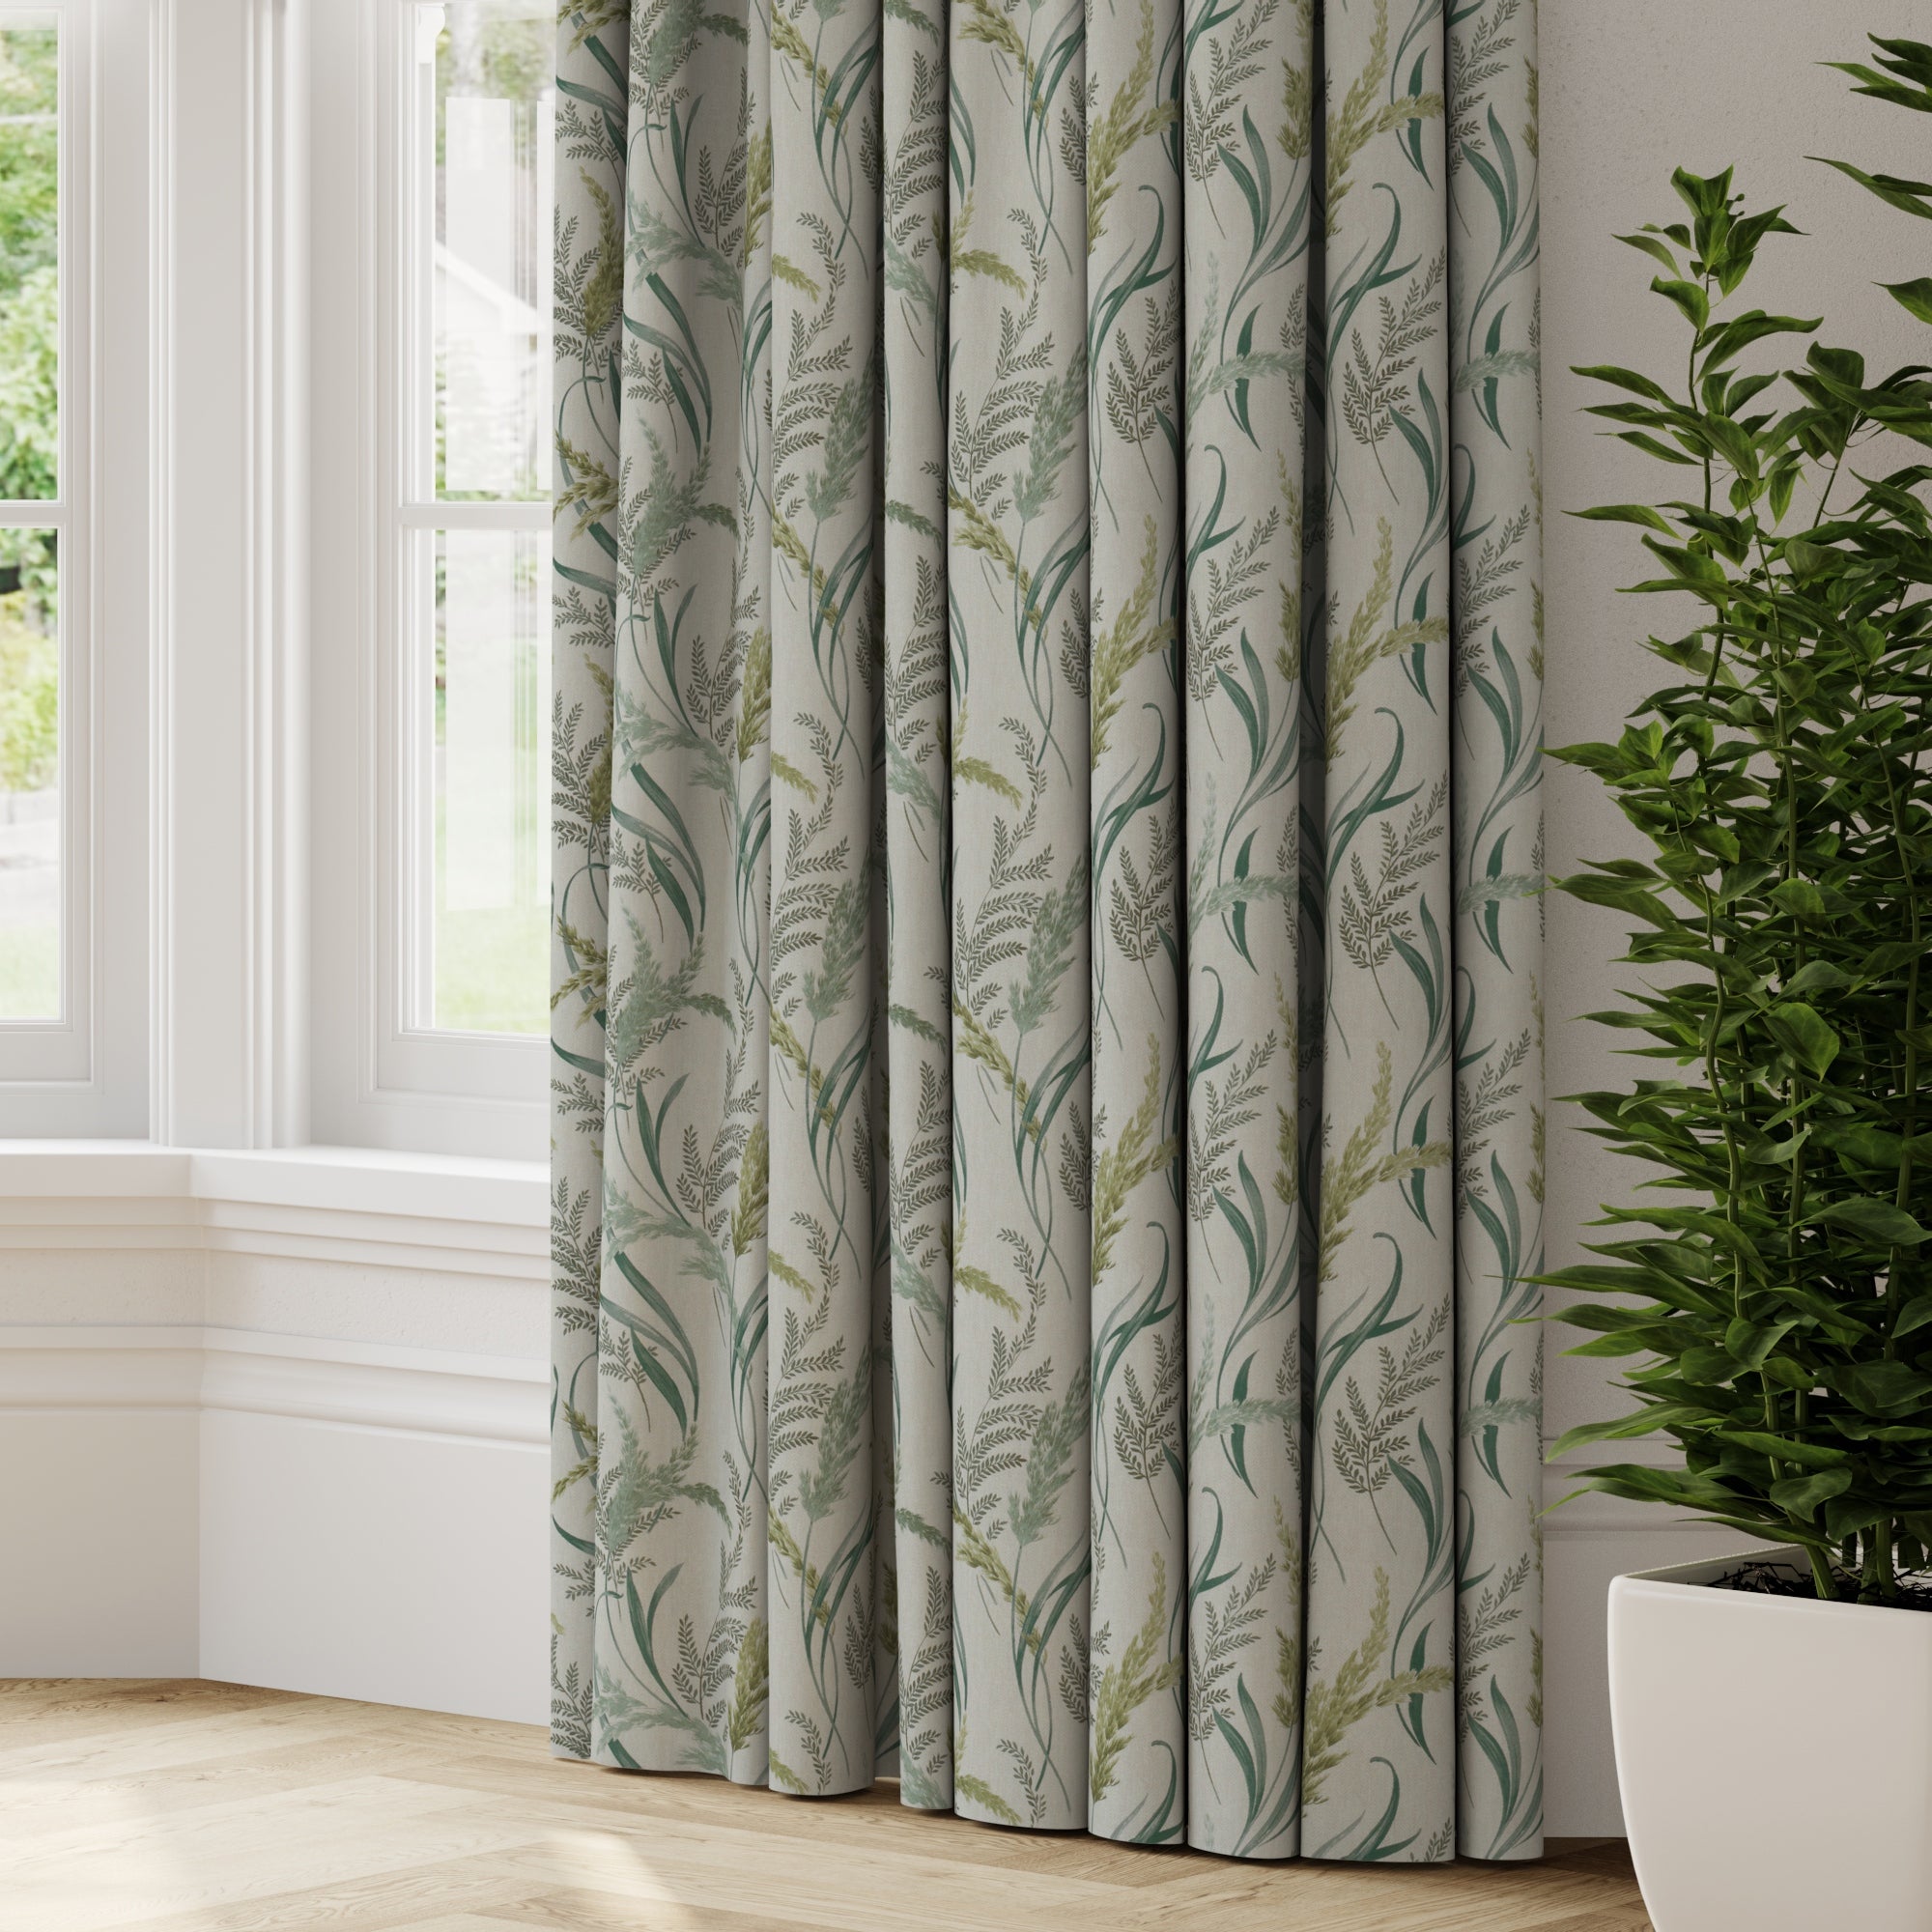 Grace Made to Measure Fire Retardant Curtains White/Green